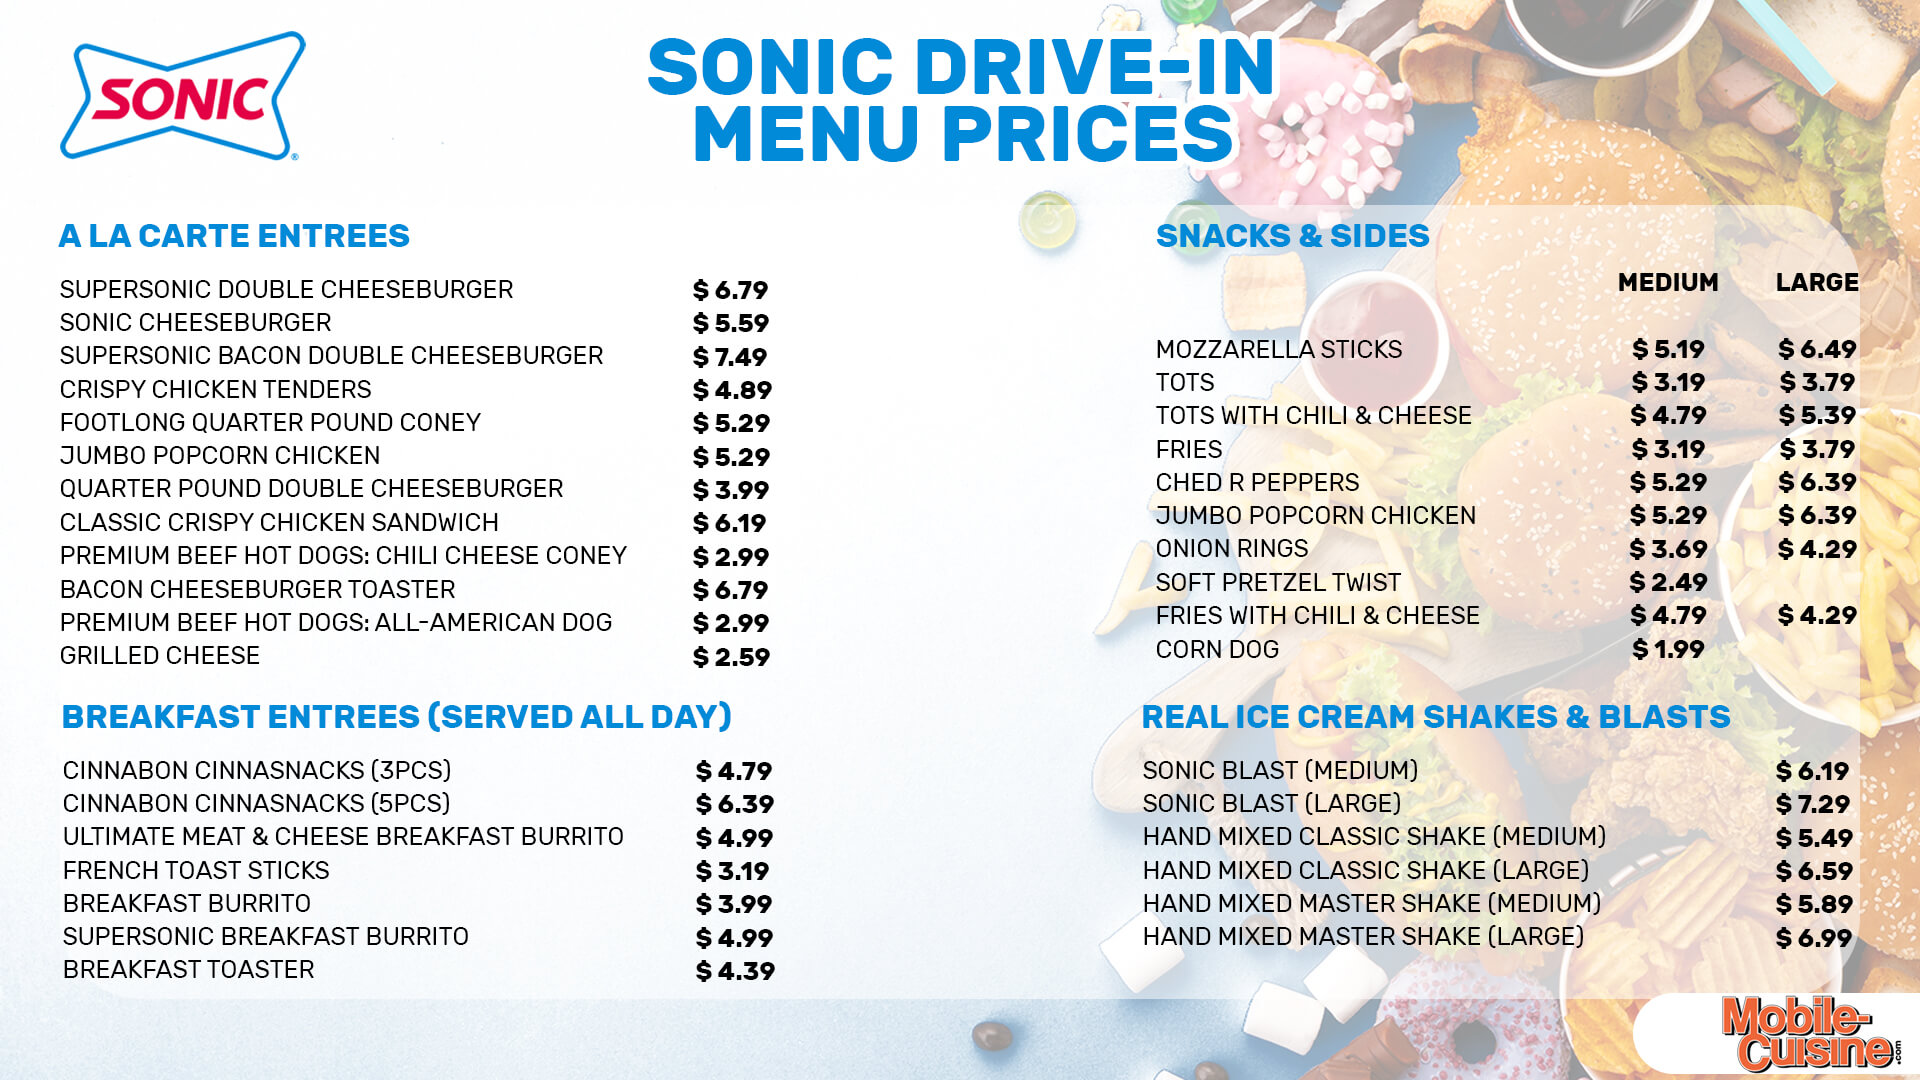 Sonic Drive-In menu prices